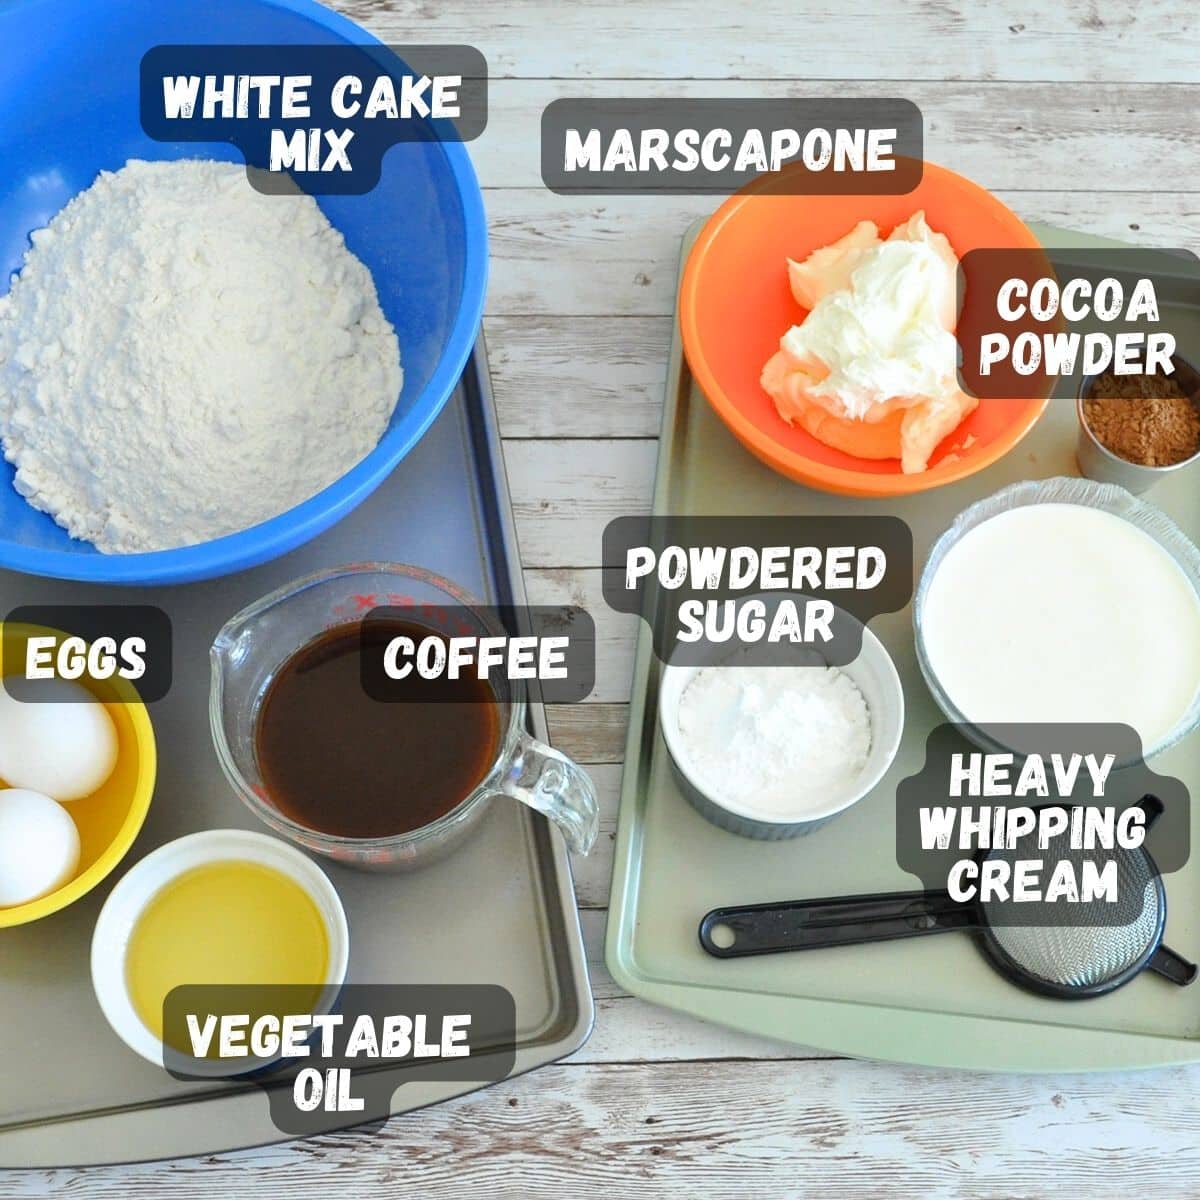 Ingredients for Tiramisu Cupcakes displayed on a table and labeled.